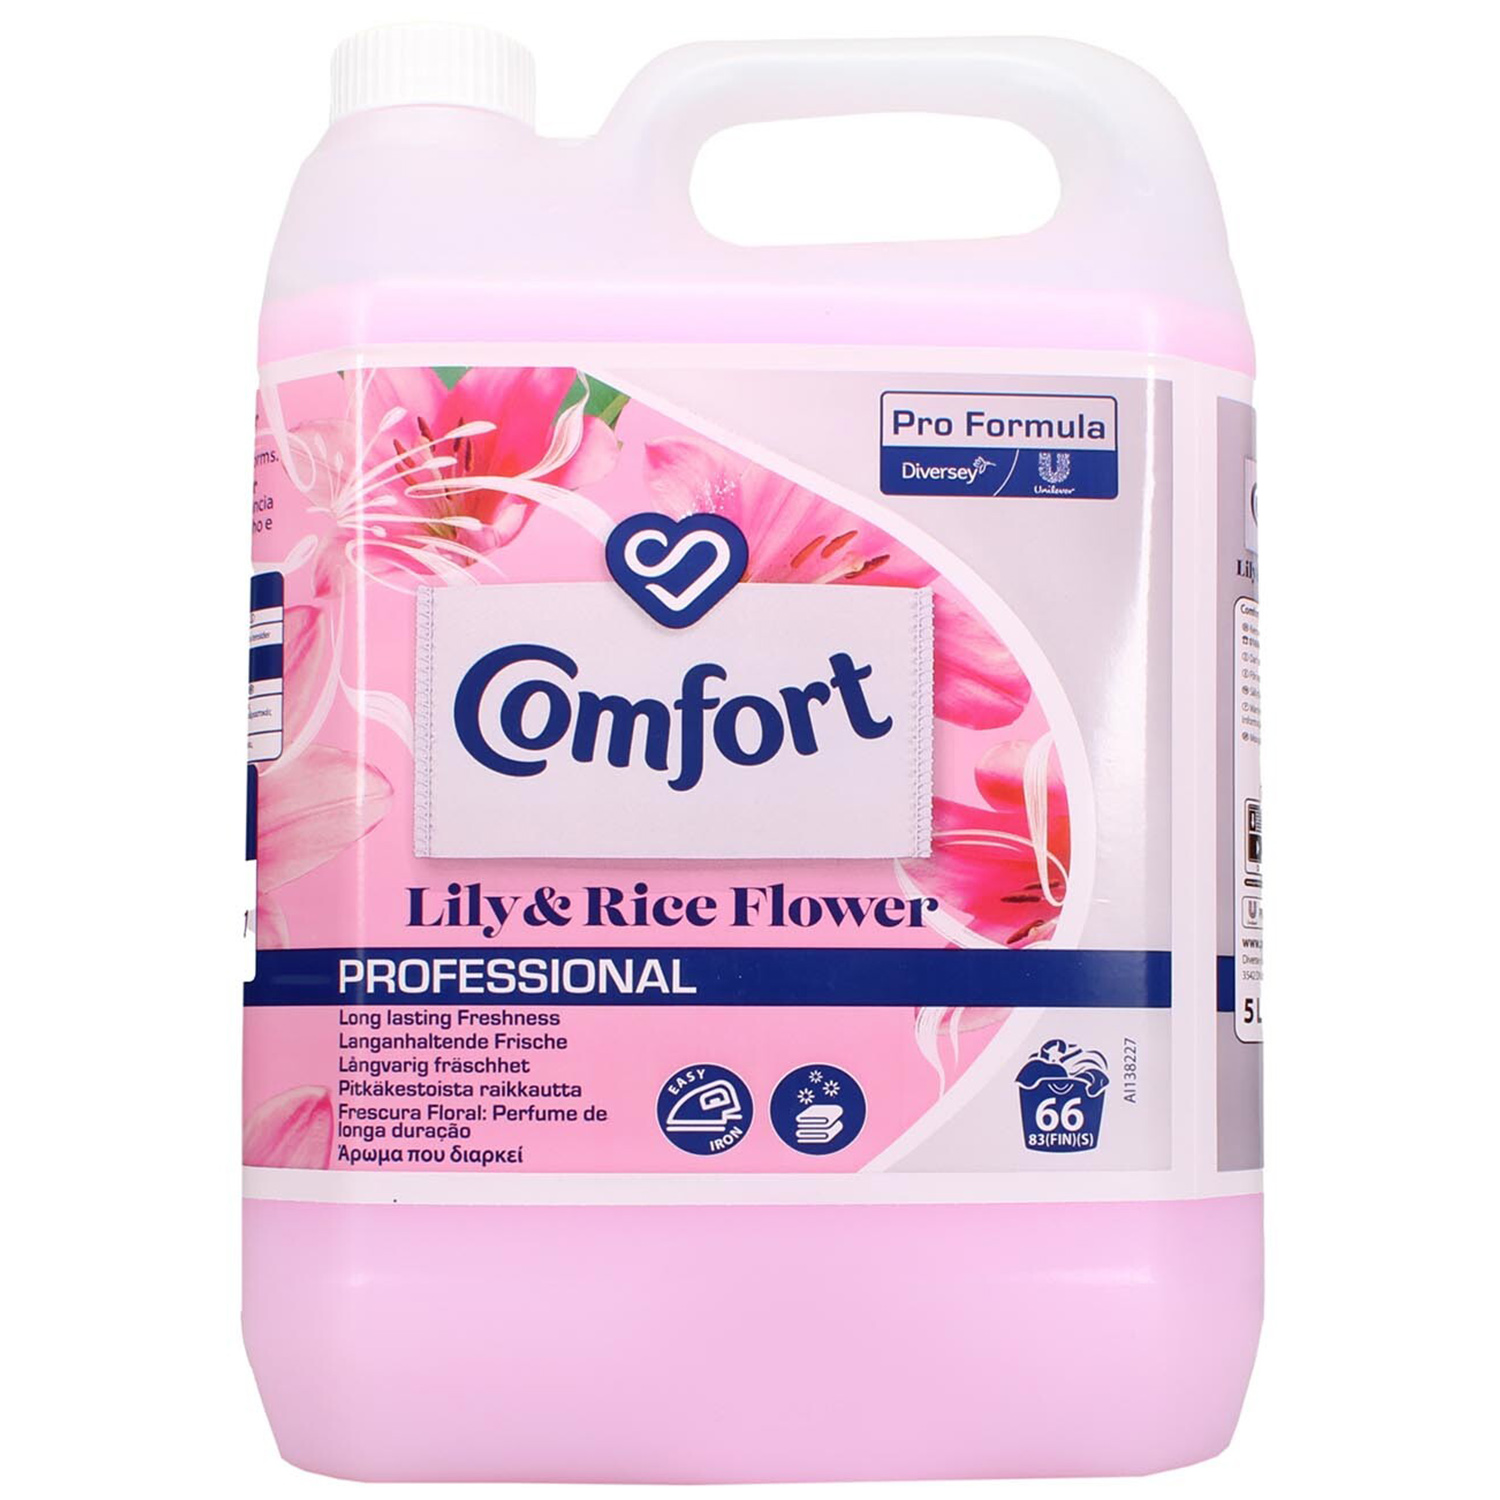 Comfort Lily and Rice Flower Professional Fabric Conditioner 5L Image